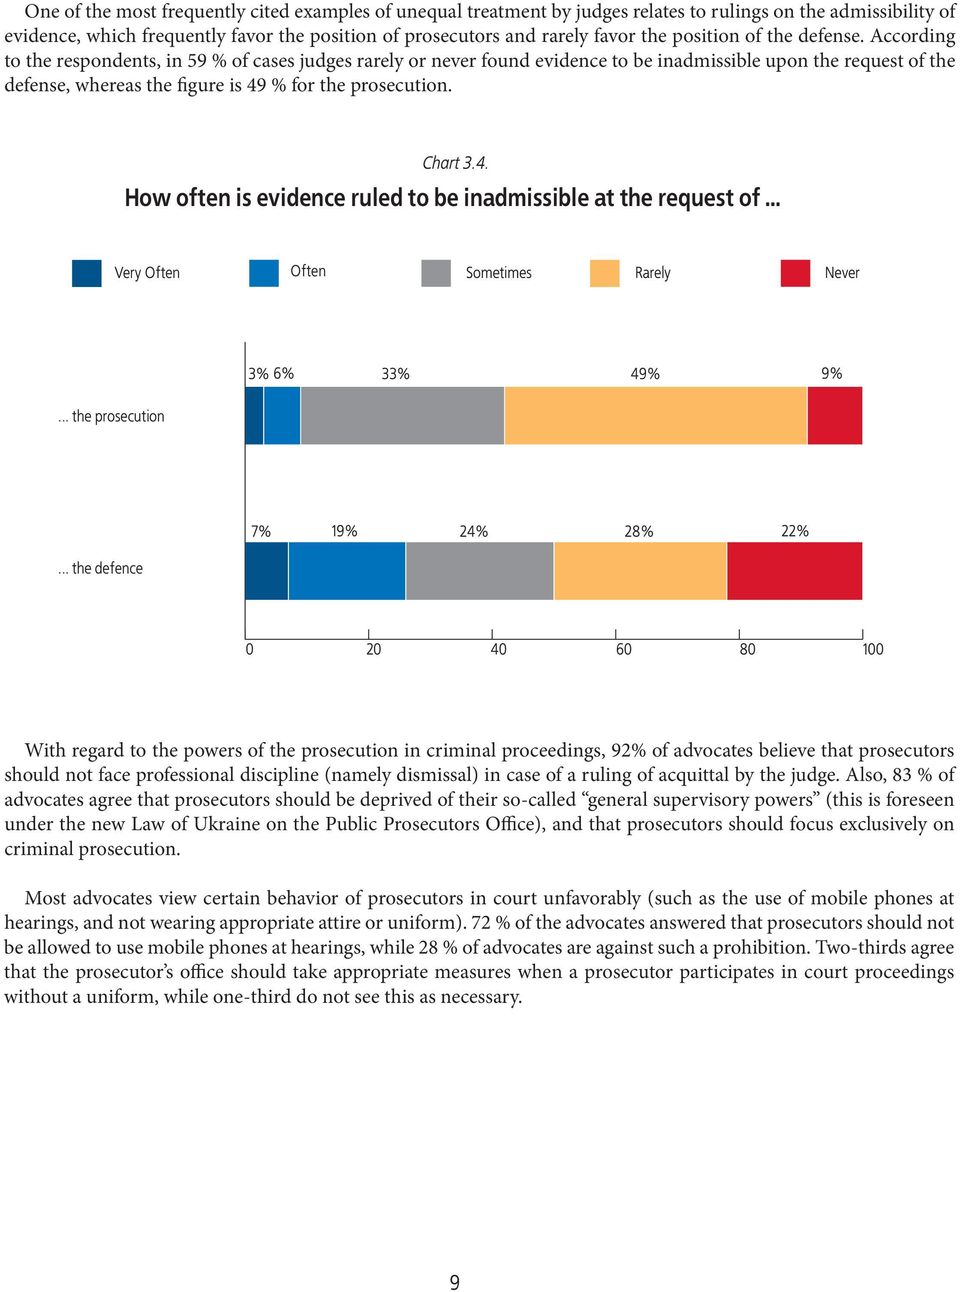 According to the respondents, in 59 % of cases judges rarely or never found evidence to be inadmissible upon the request of the defense, whereas the figure is 49